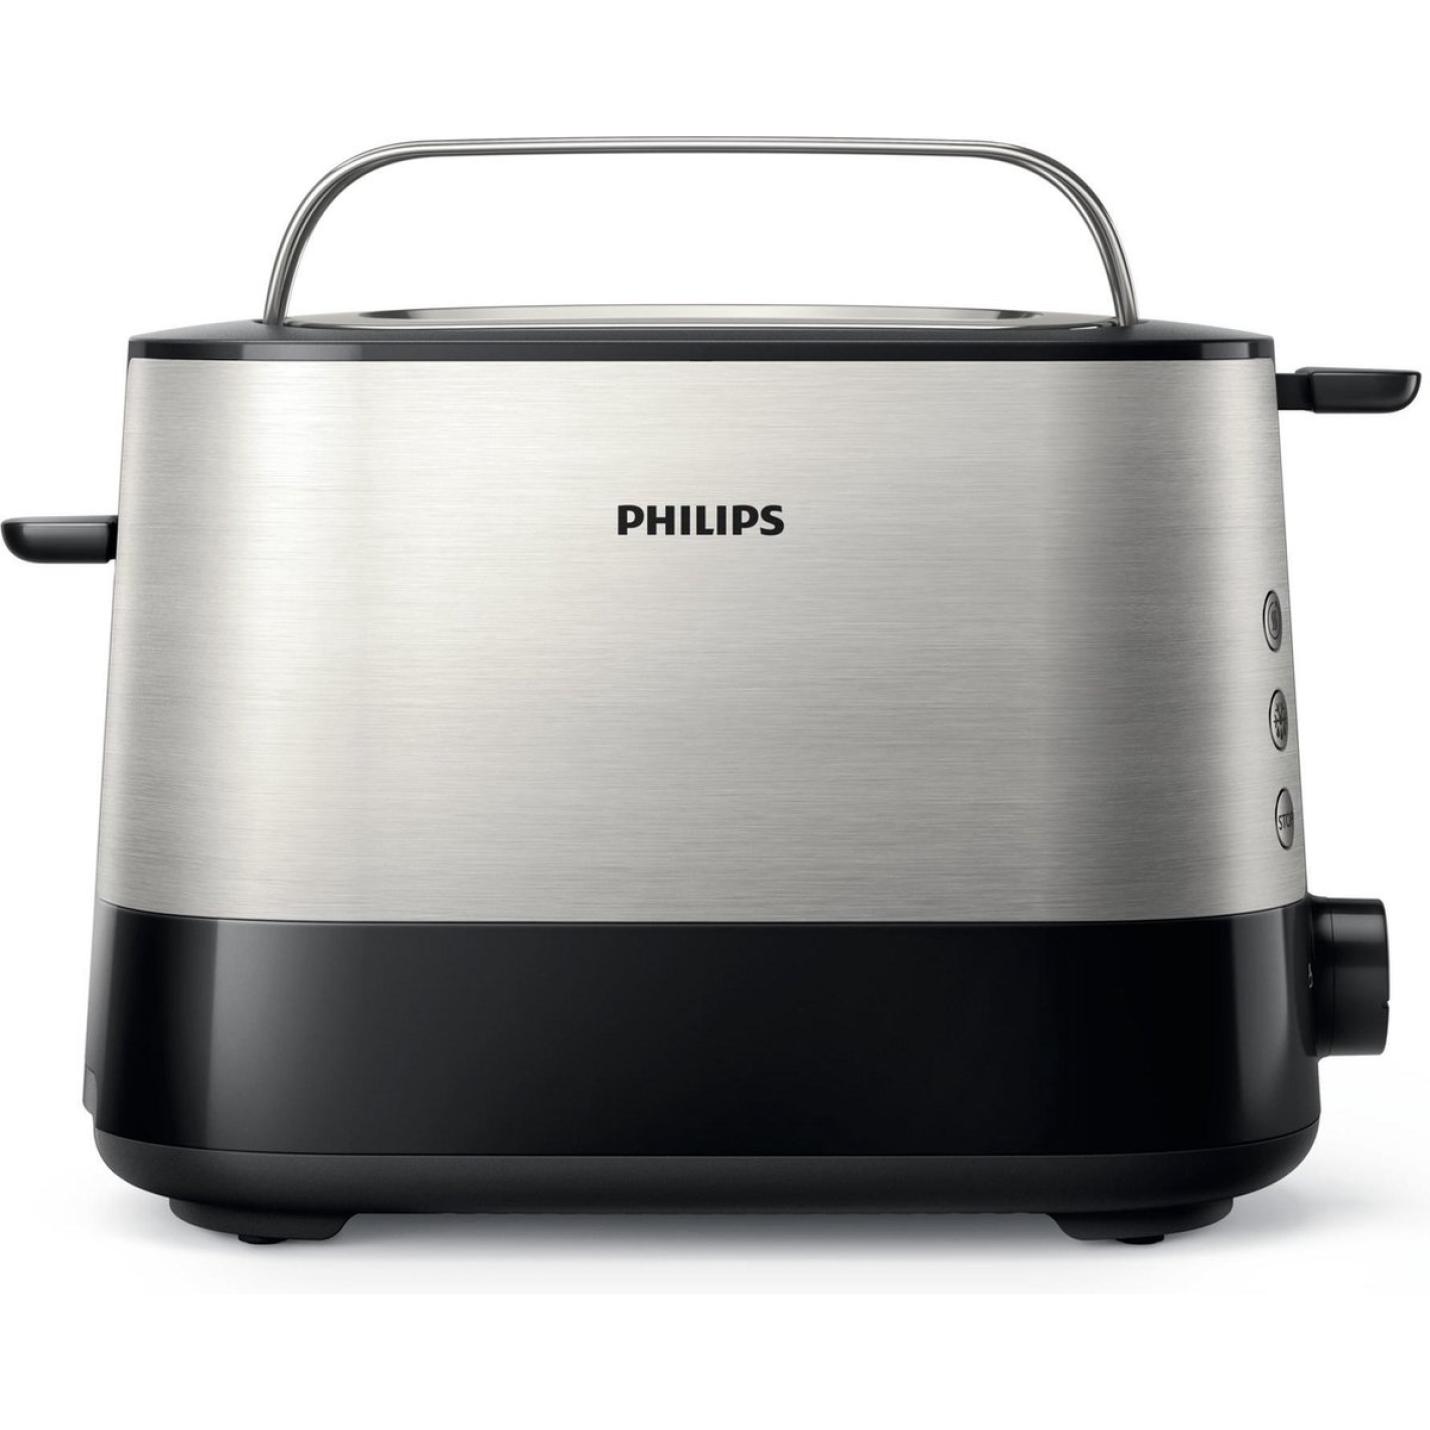 Philips Viva Collection Extra brede broodrooster met 2 sleuven, broodrooster 4